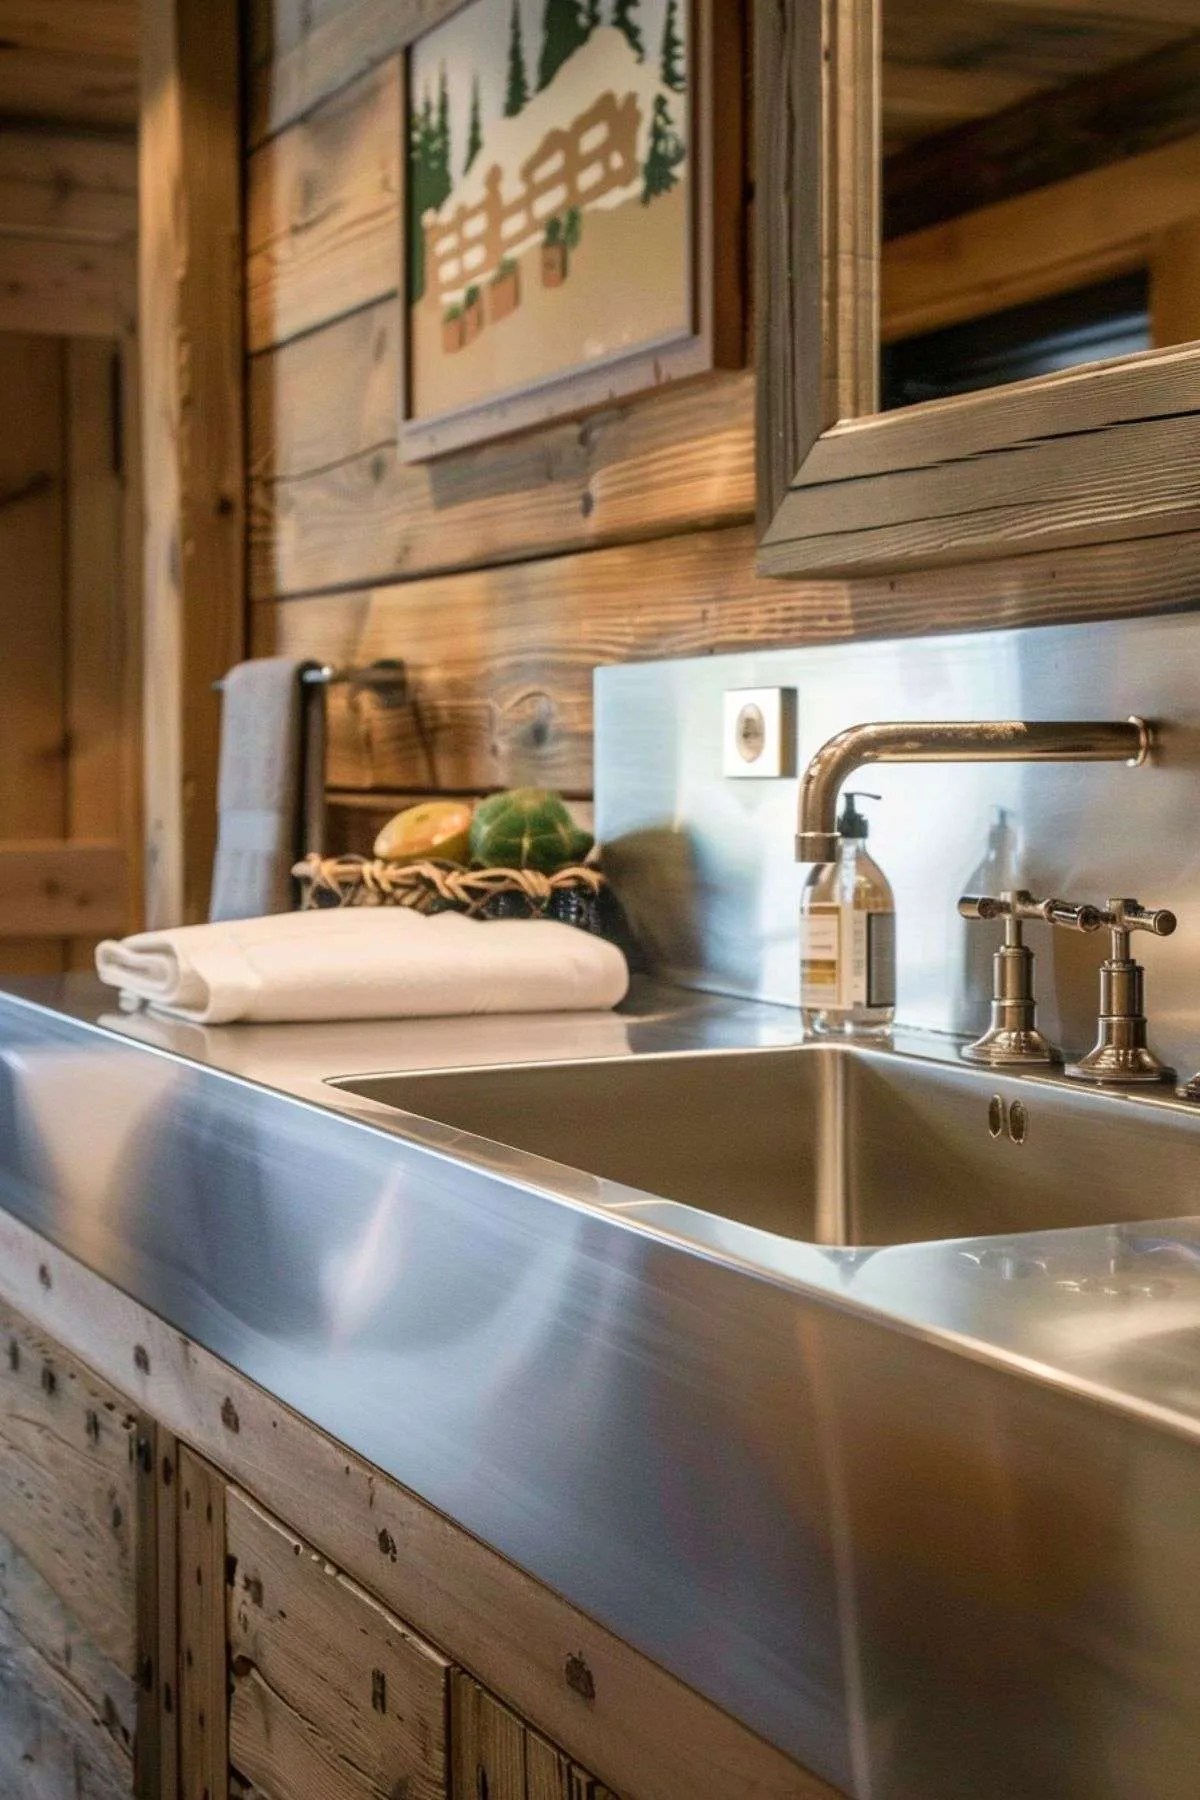 Why Stainless Steel Sinks are a Top Choice for a Modern Bathroom